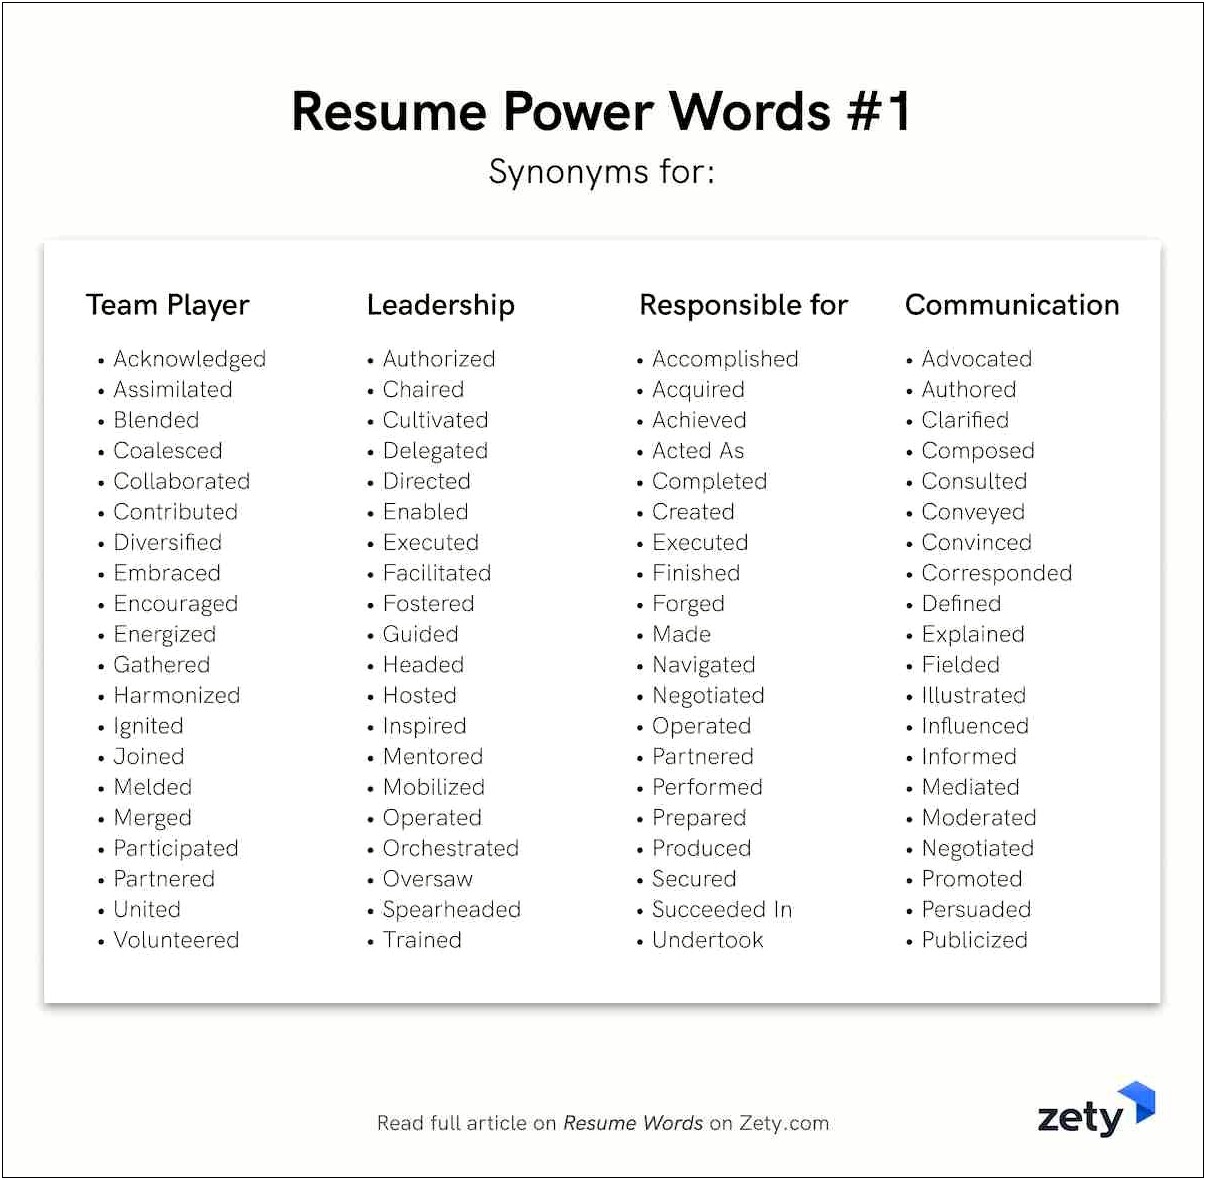 Best Descriptive Words To Use On A Resume